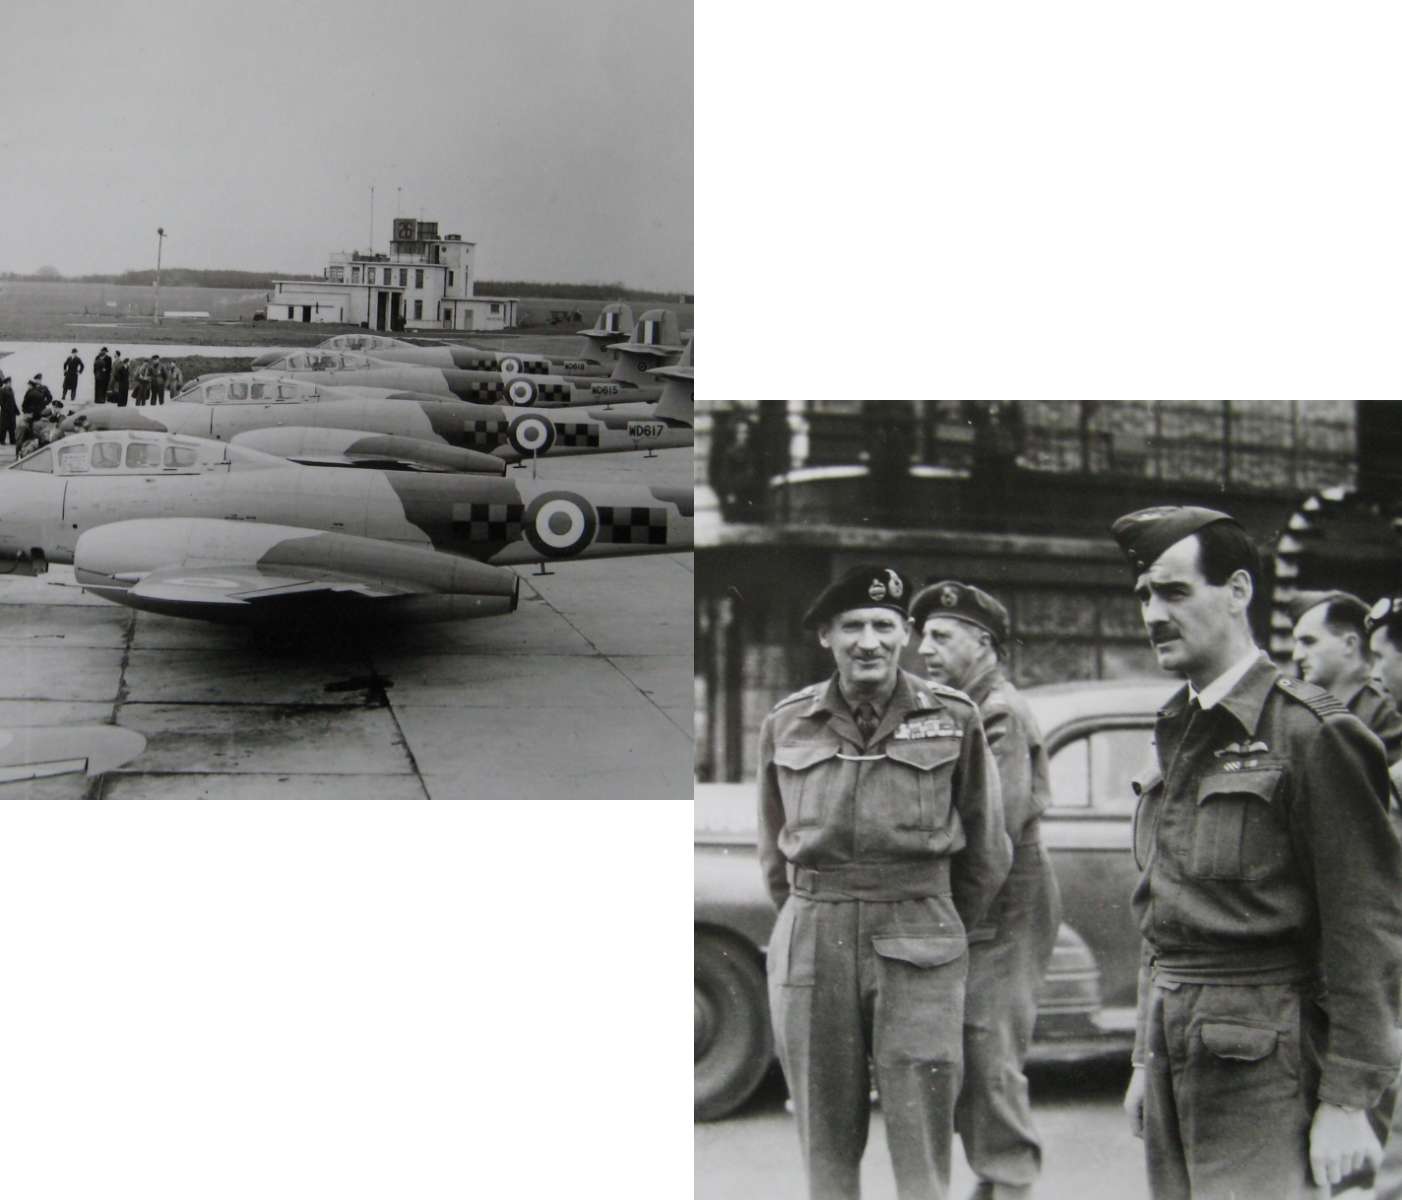 collage of two black and white photos. each photo is from when the site was still West Malling airbase. one photo shows planes lined up next to one another on the runway. the other shows a group of soldiers.